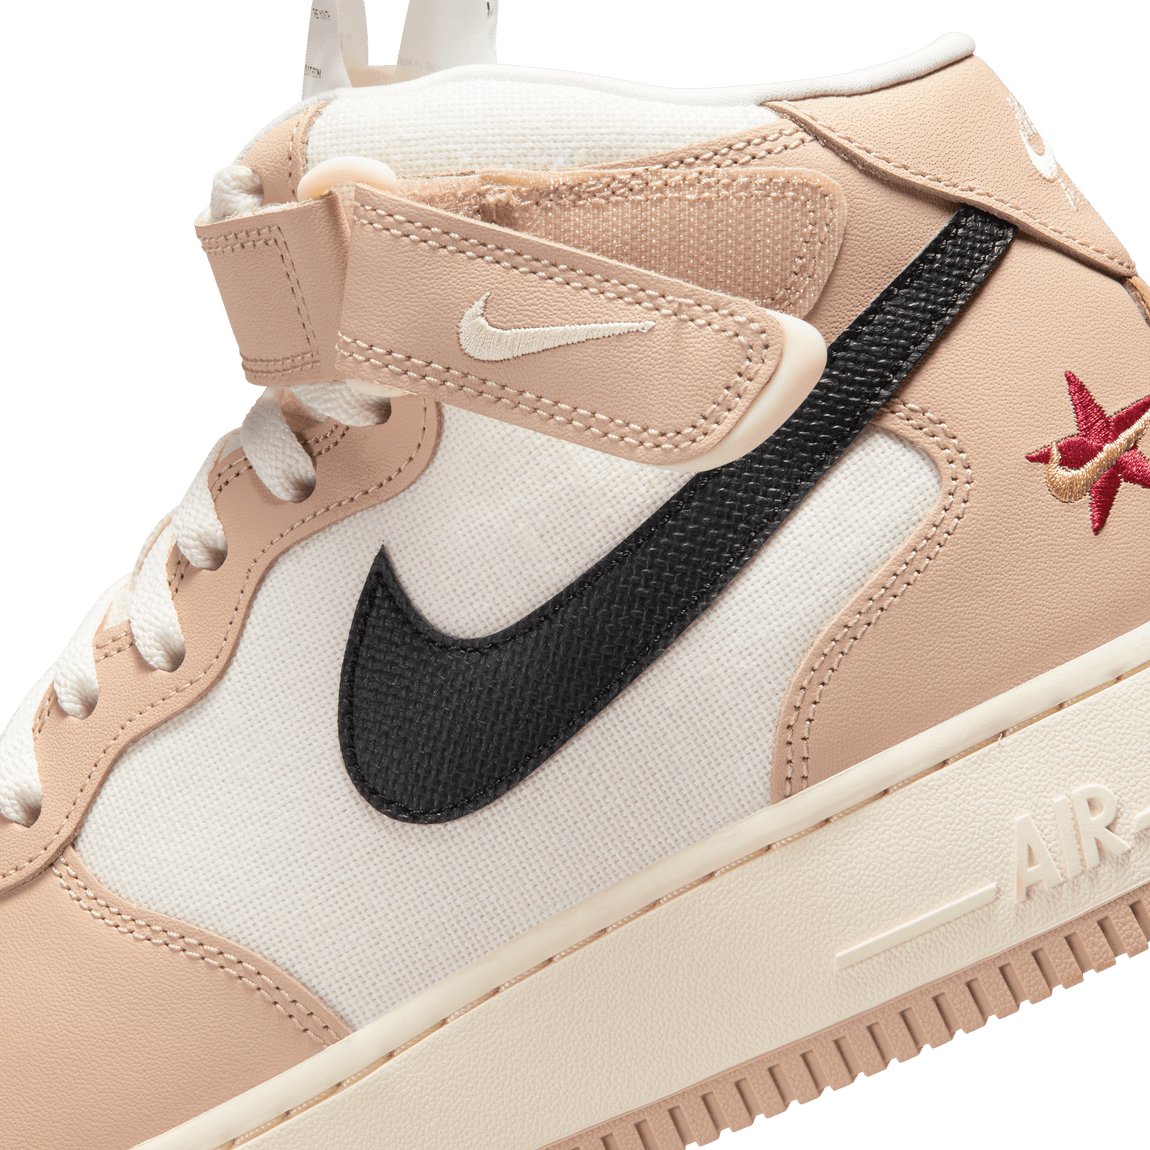 Nike Air Force 1 Mid '07 LX (Shimmer/Black/Pale Ivory-Coconut Milk) - Nike Air Force 1 Mid '07 LX (Shimmer/Black/Pale Ivory-Coconut Milk) - 